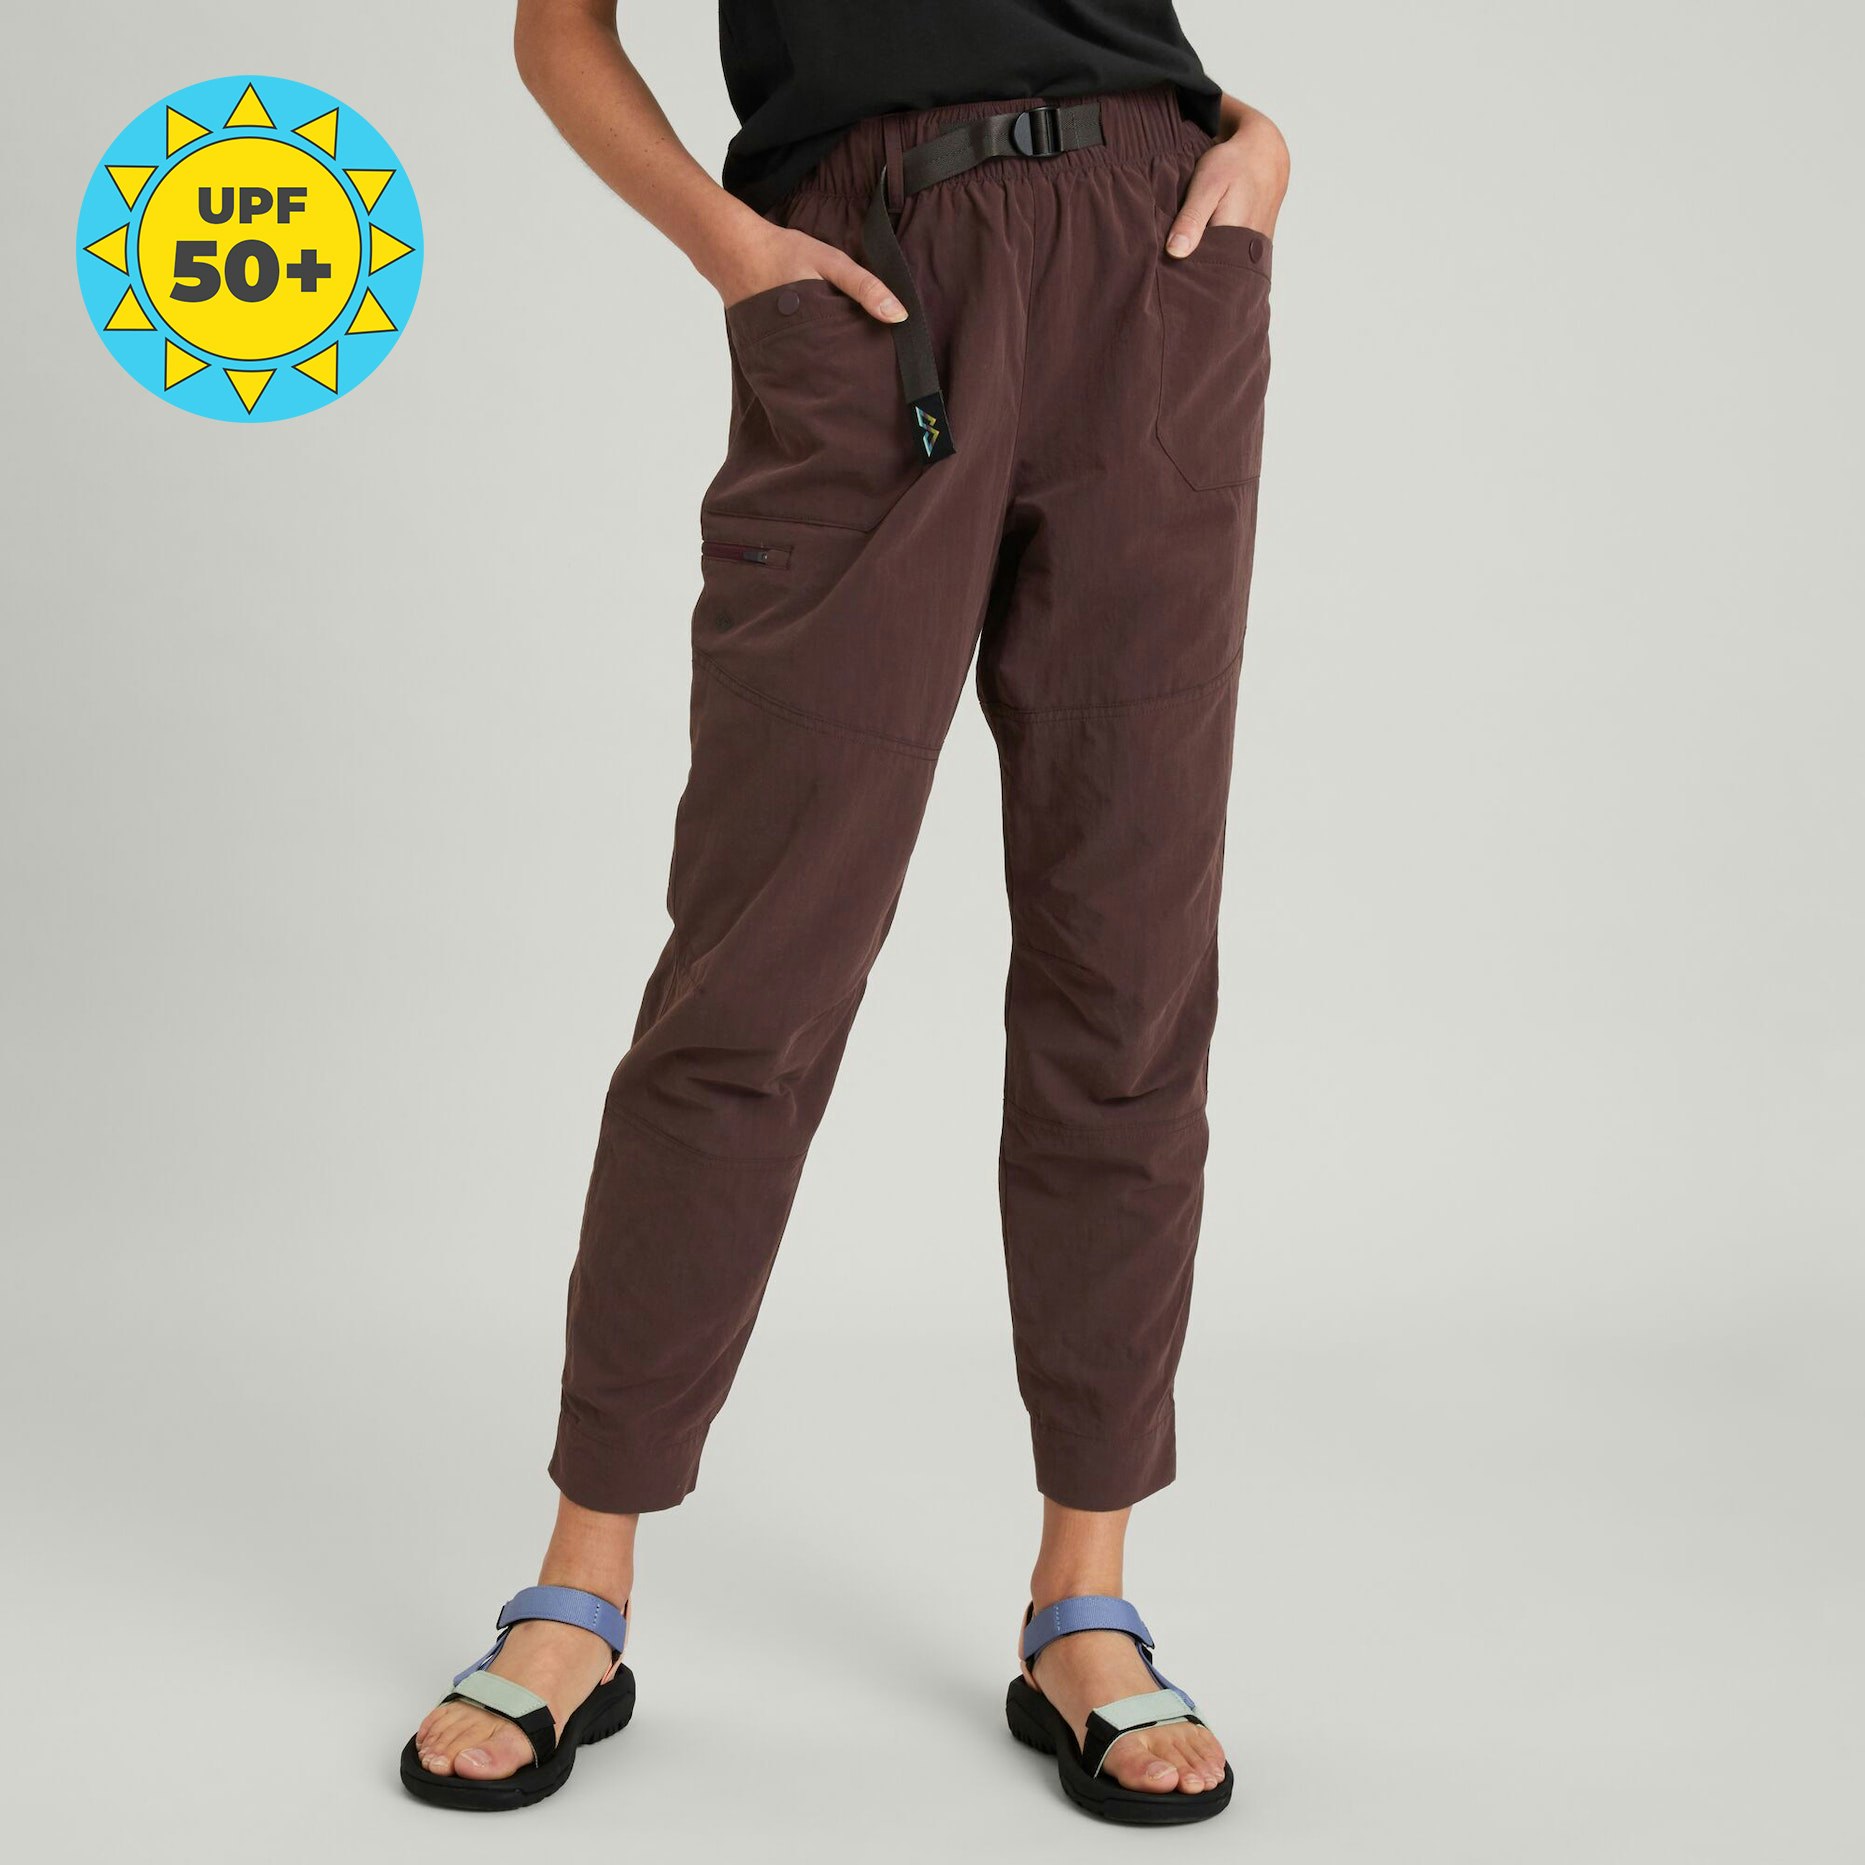 EVRY-Day Women's Pants